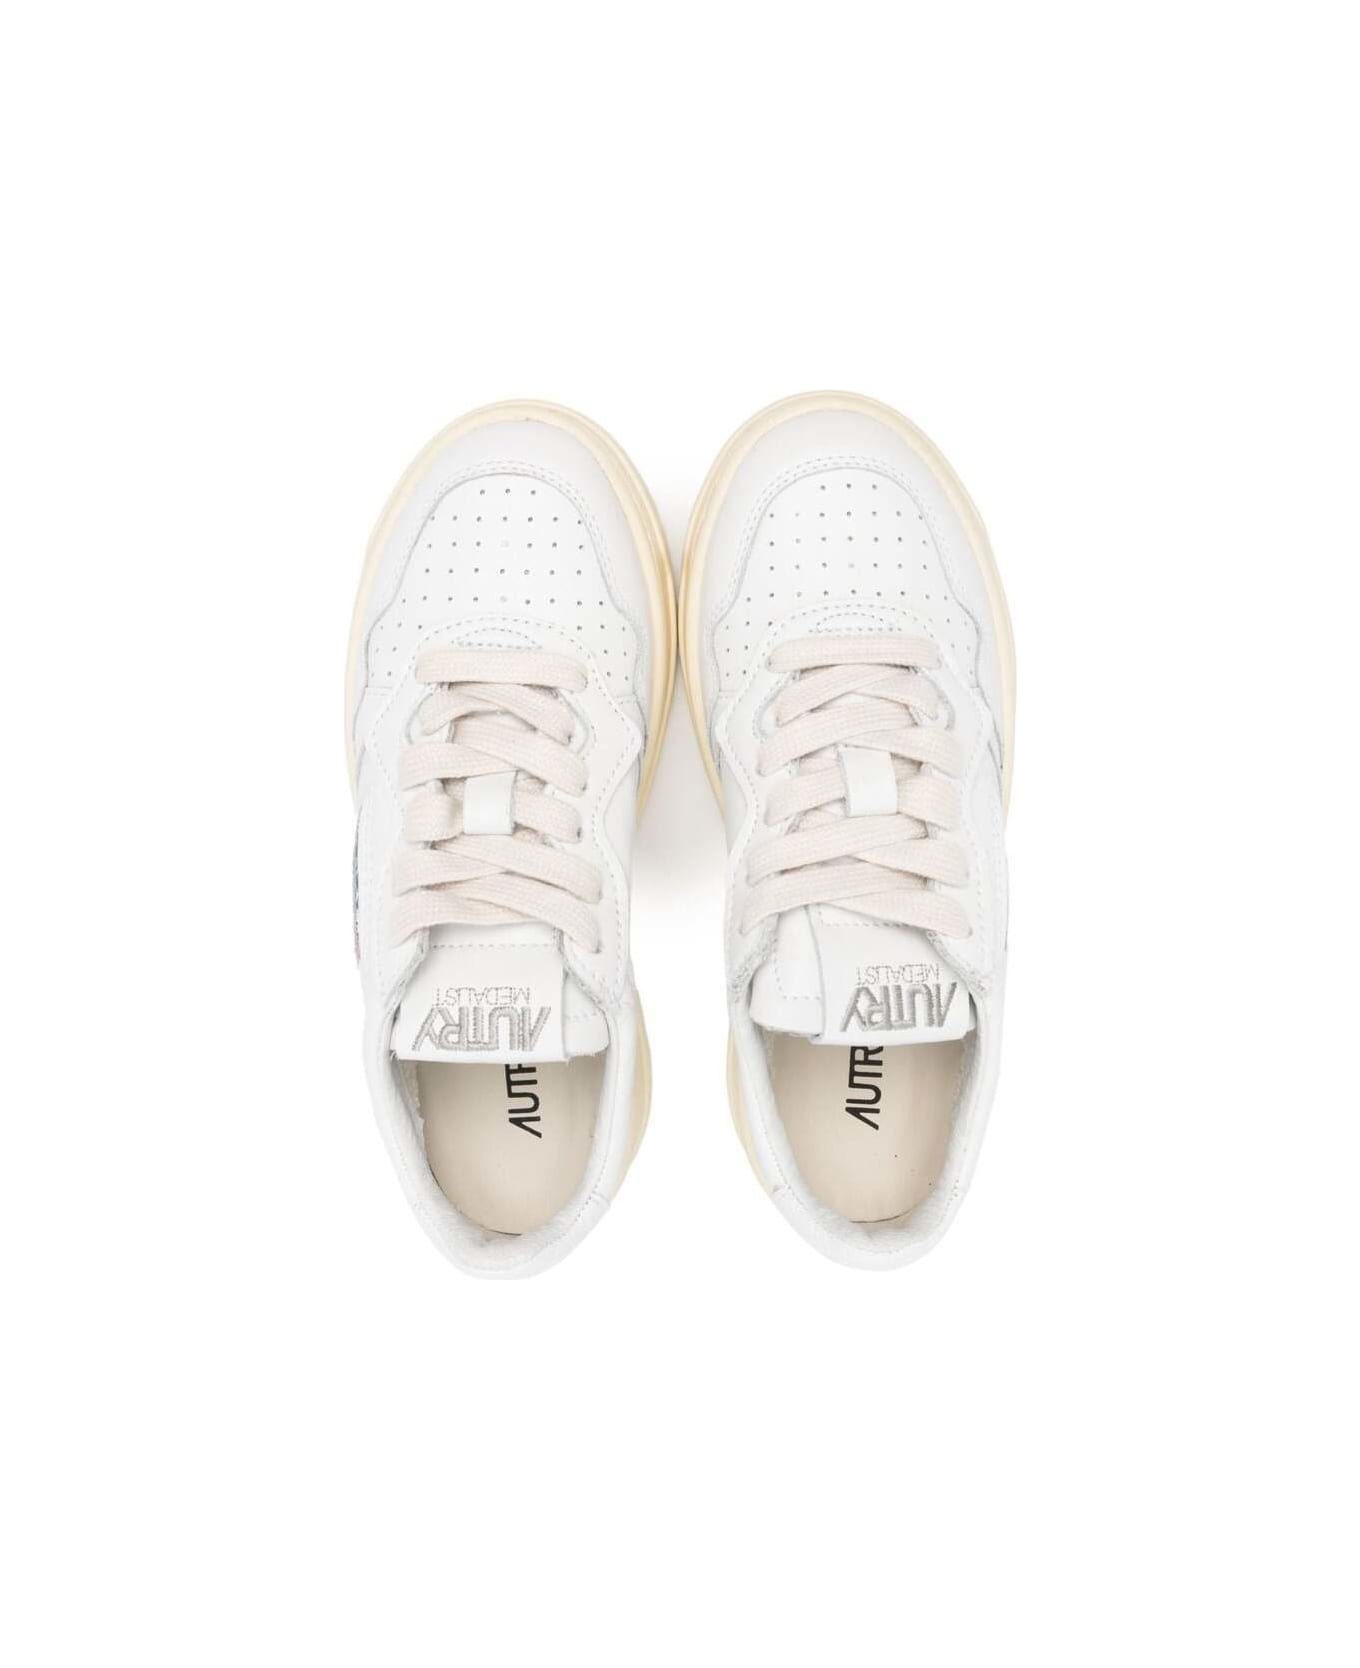 Autry White 'medalist' Low Top Sneakers In Cow Leather Boy - Wht/wht